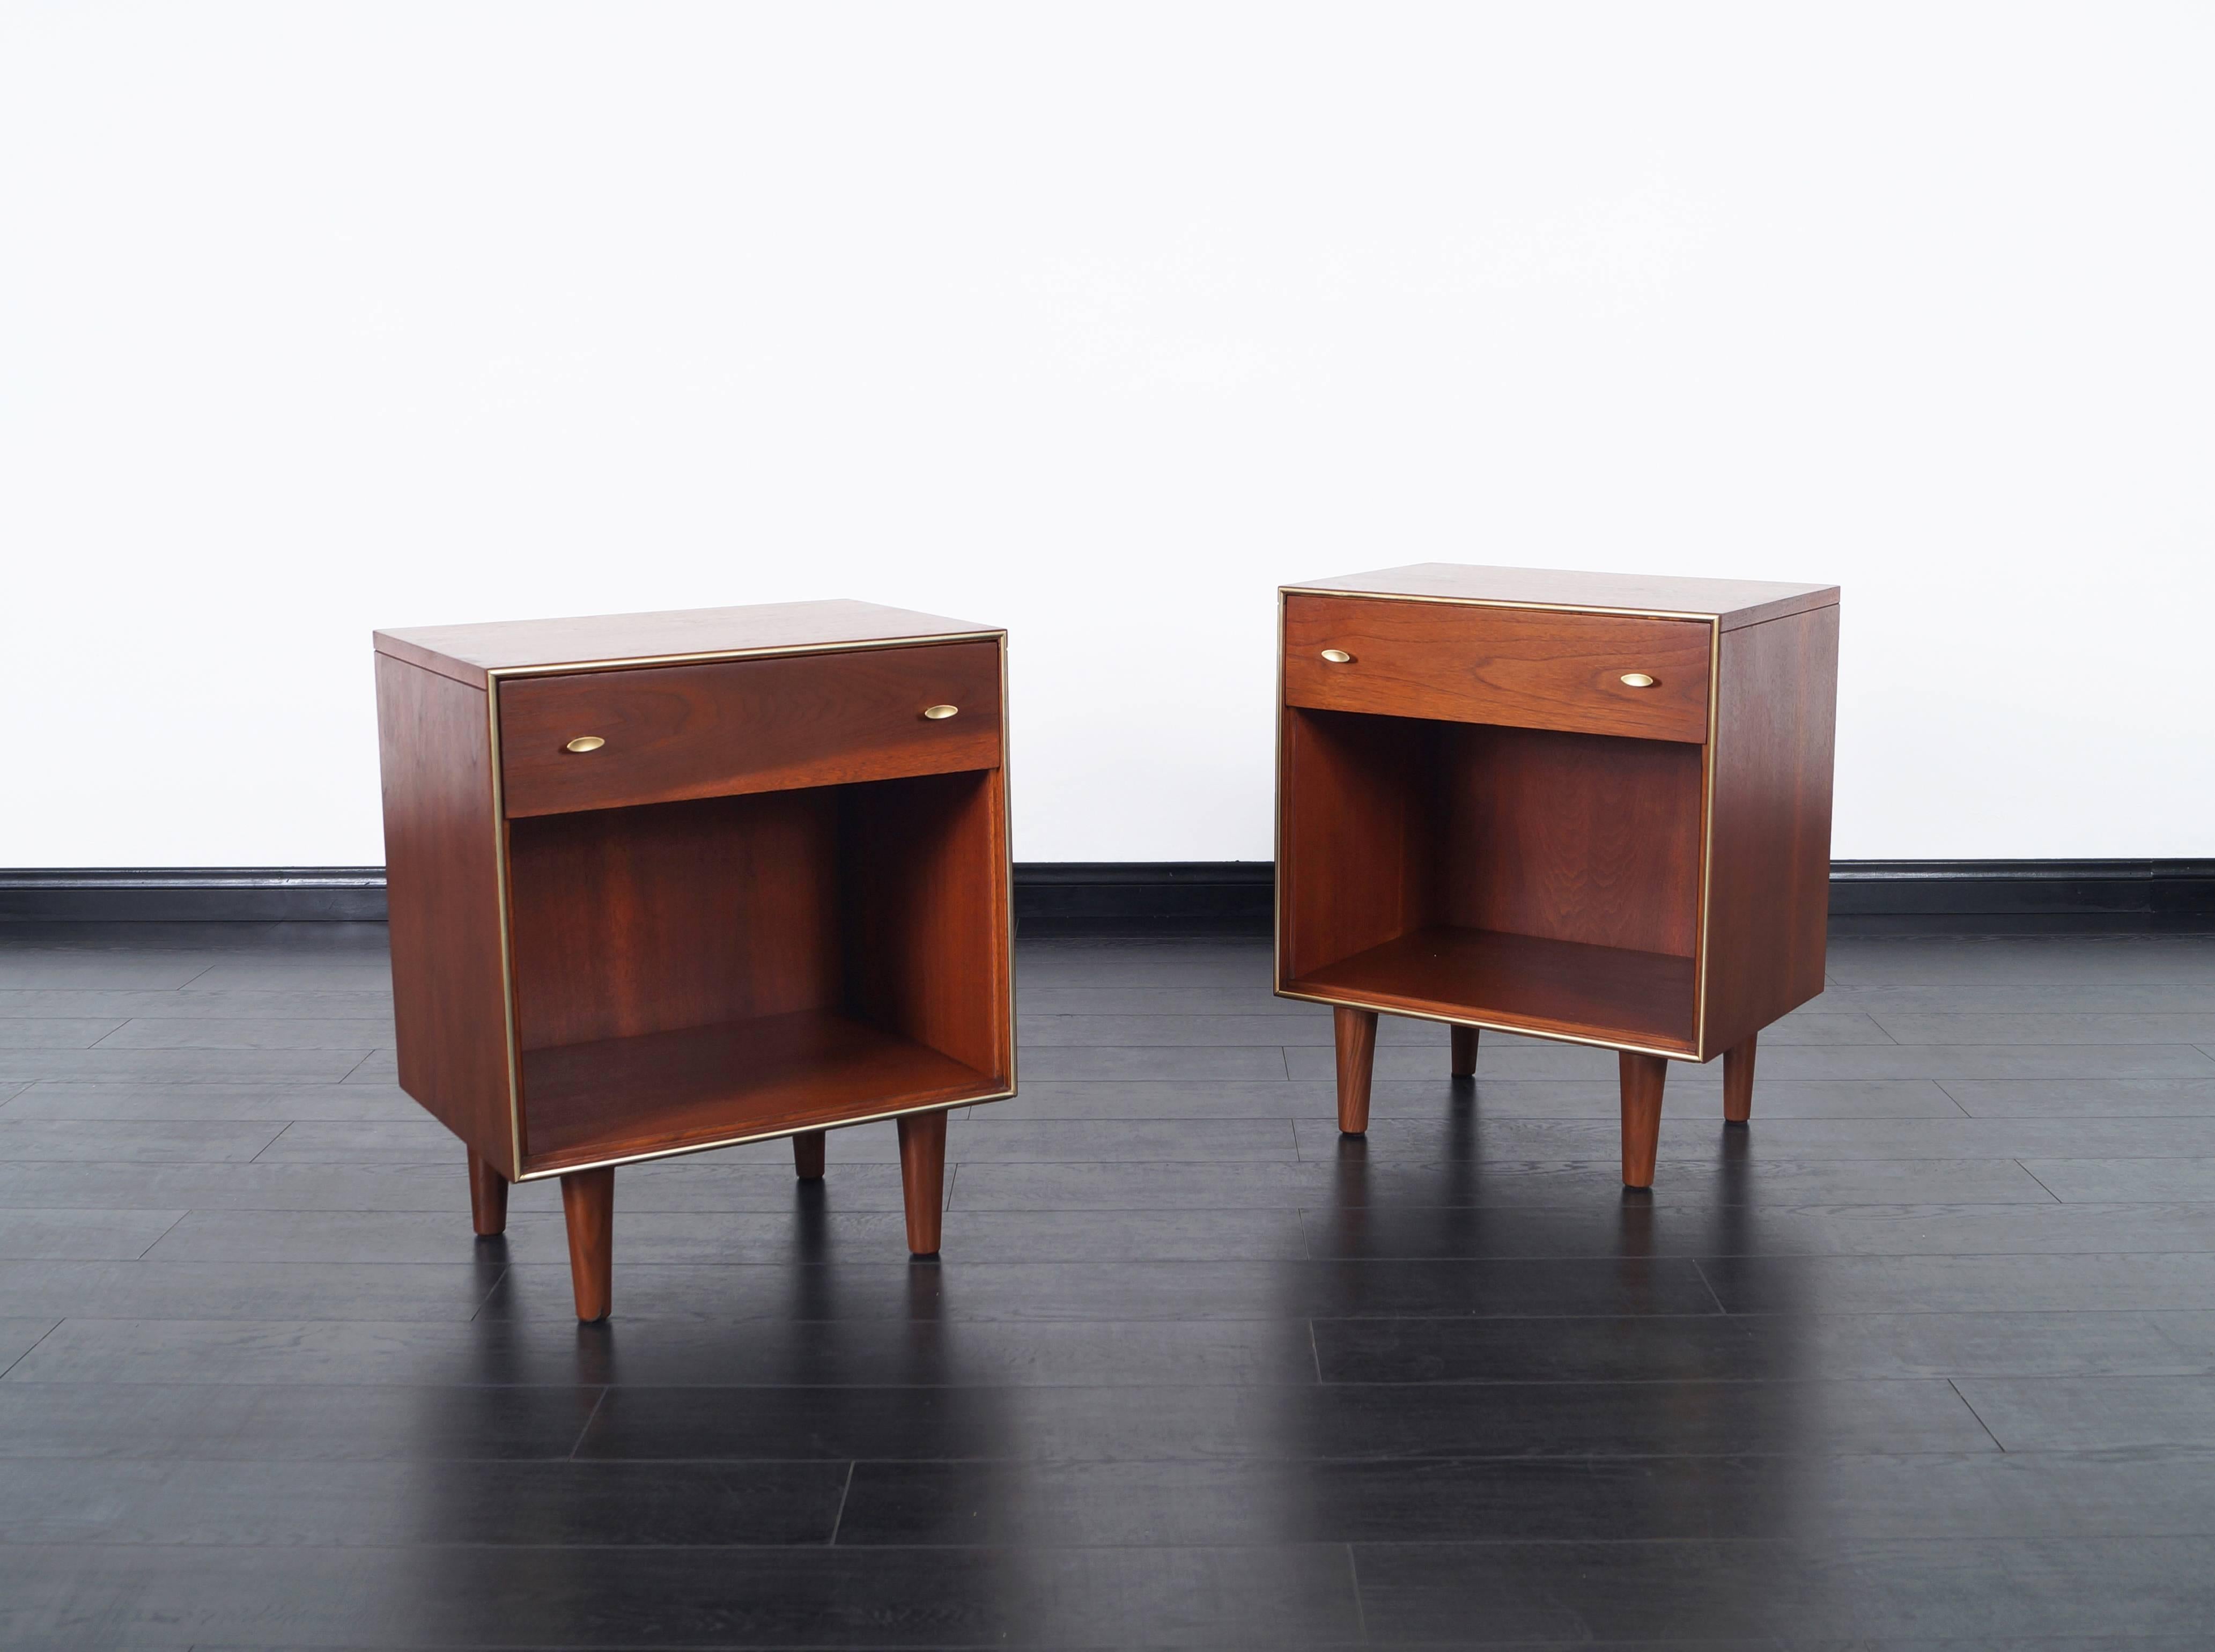 Pair of fabulous Mid-Century Modern walnut nightstands by R-Way. Each nightstand features one pull-out drawer with open storage underneath. Handles are stained in a brass finish.